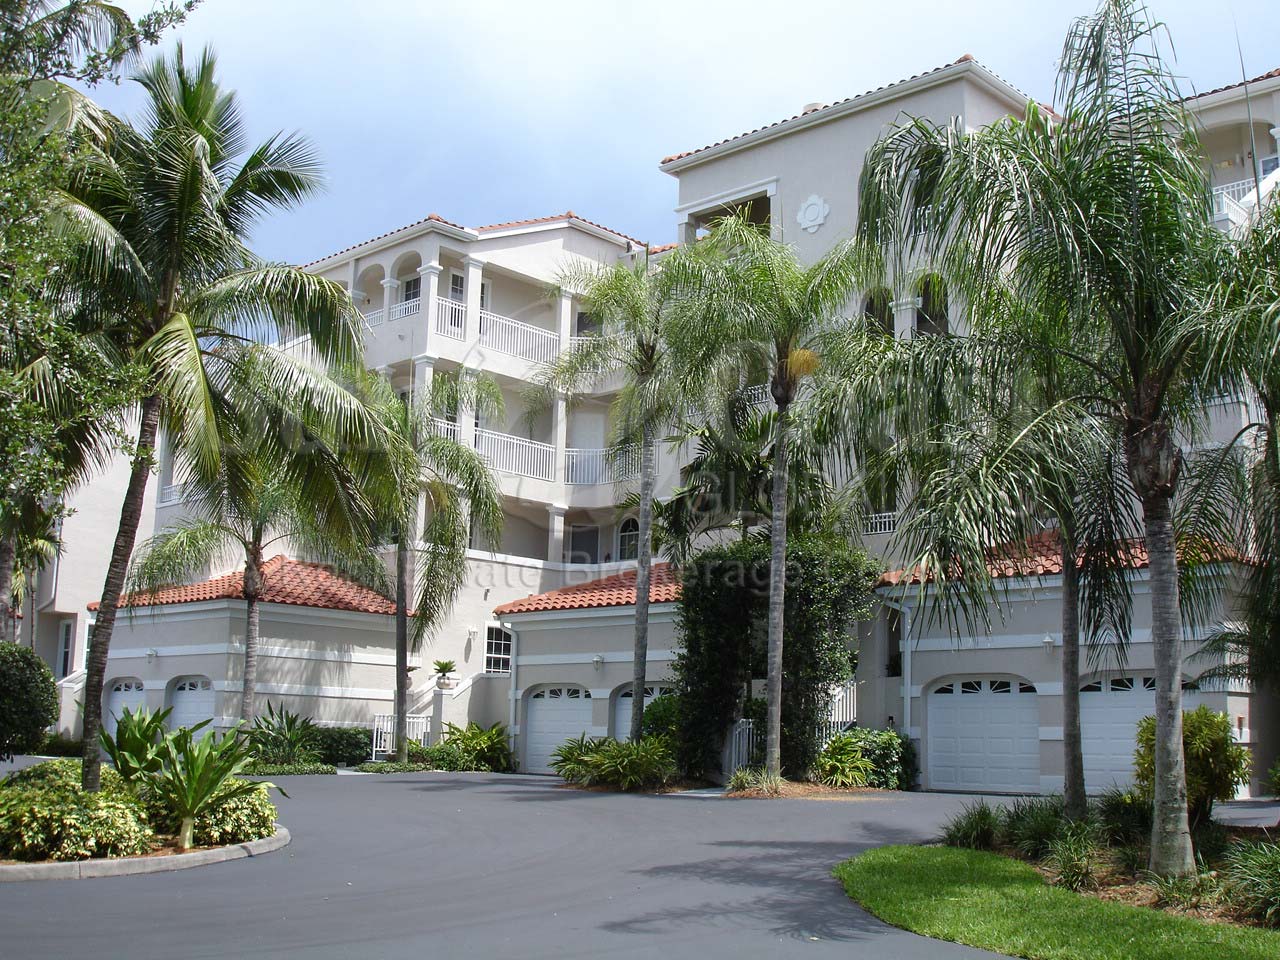 Clermont 4-story condos with garages